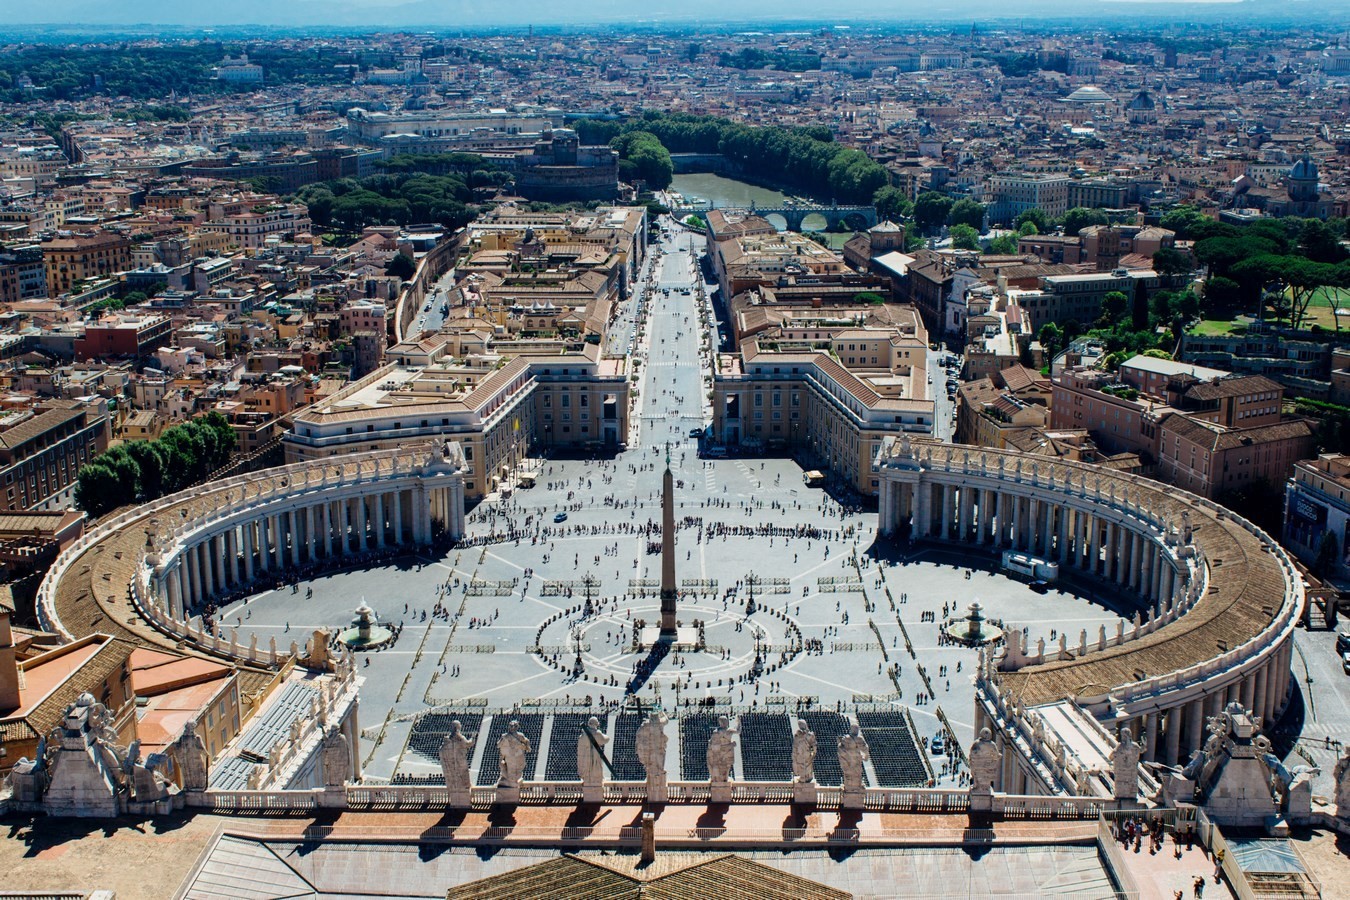 St Peter’s Basilica and Square - Vatican City - Sheet3